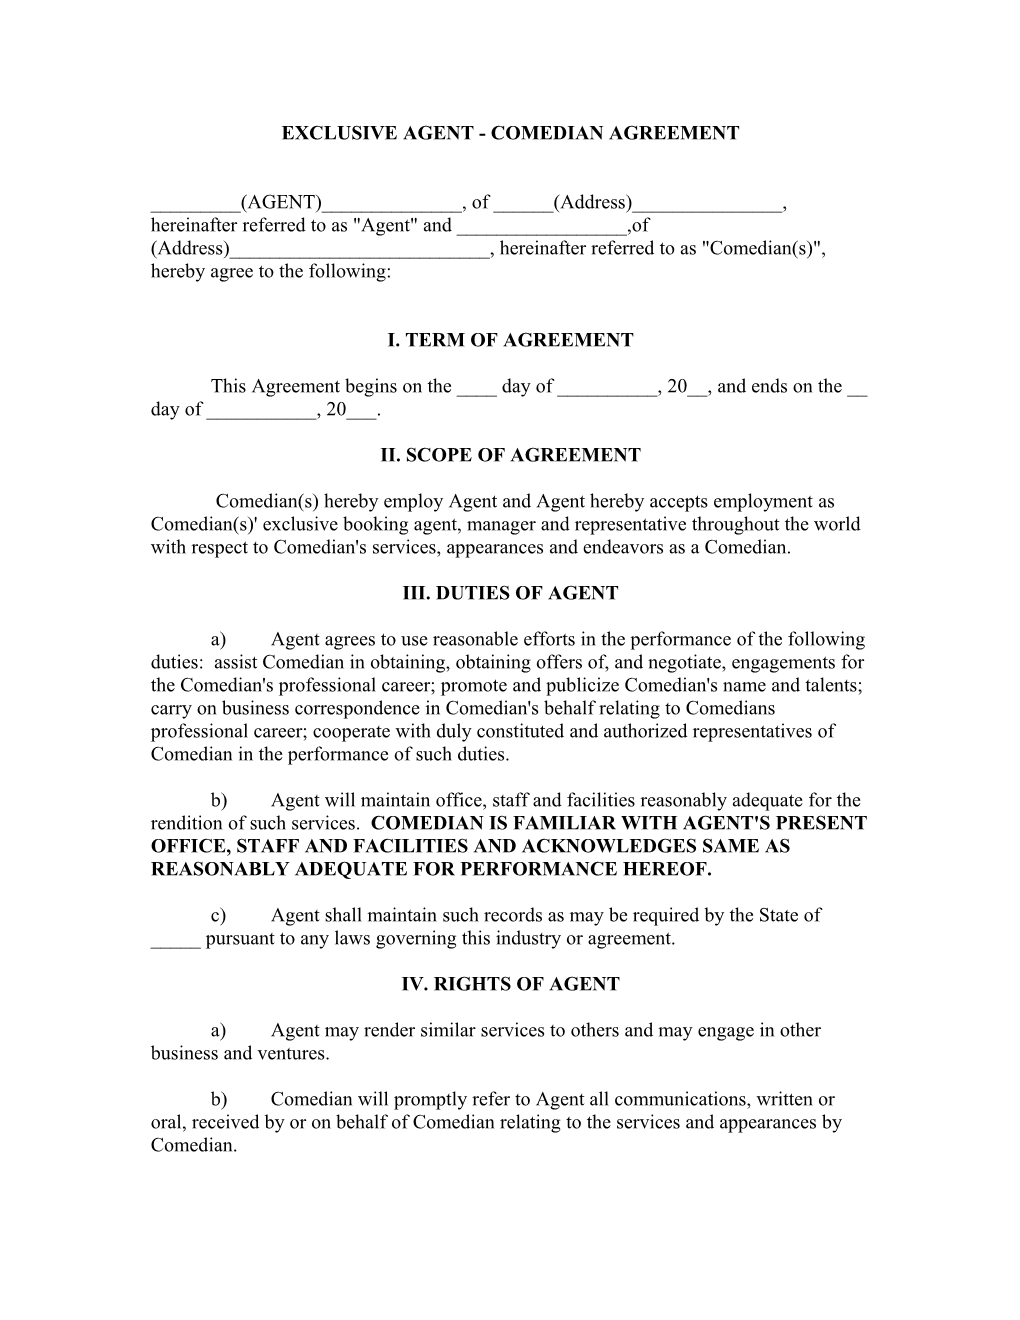 Exclusive Agent - Musician Agreement